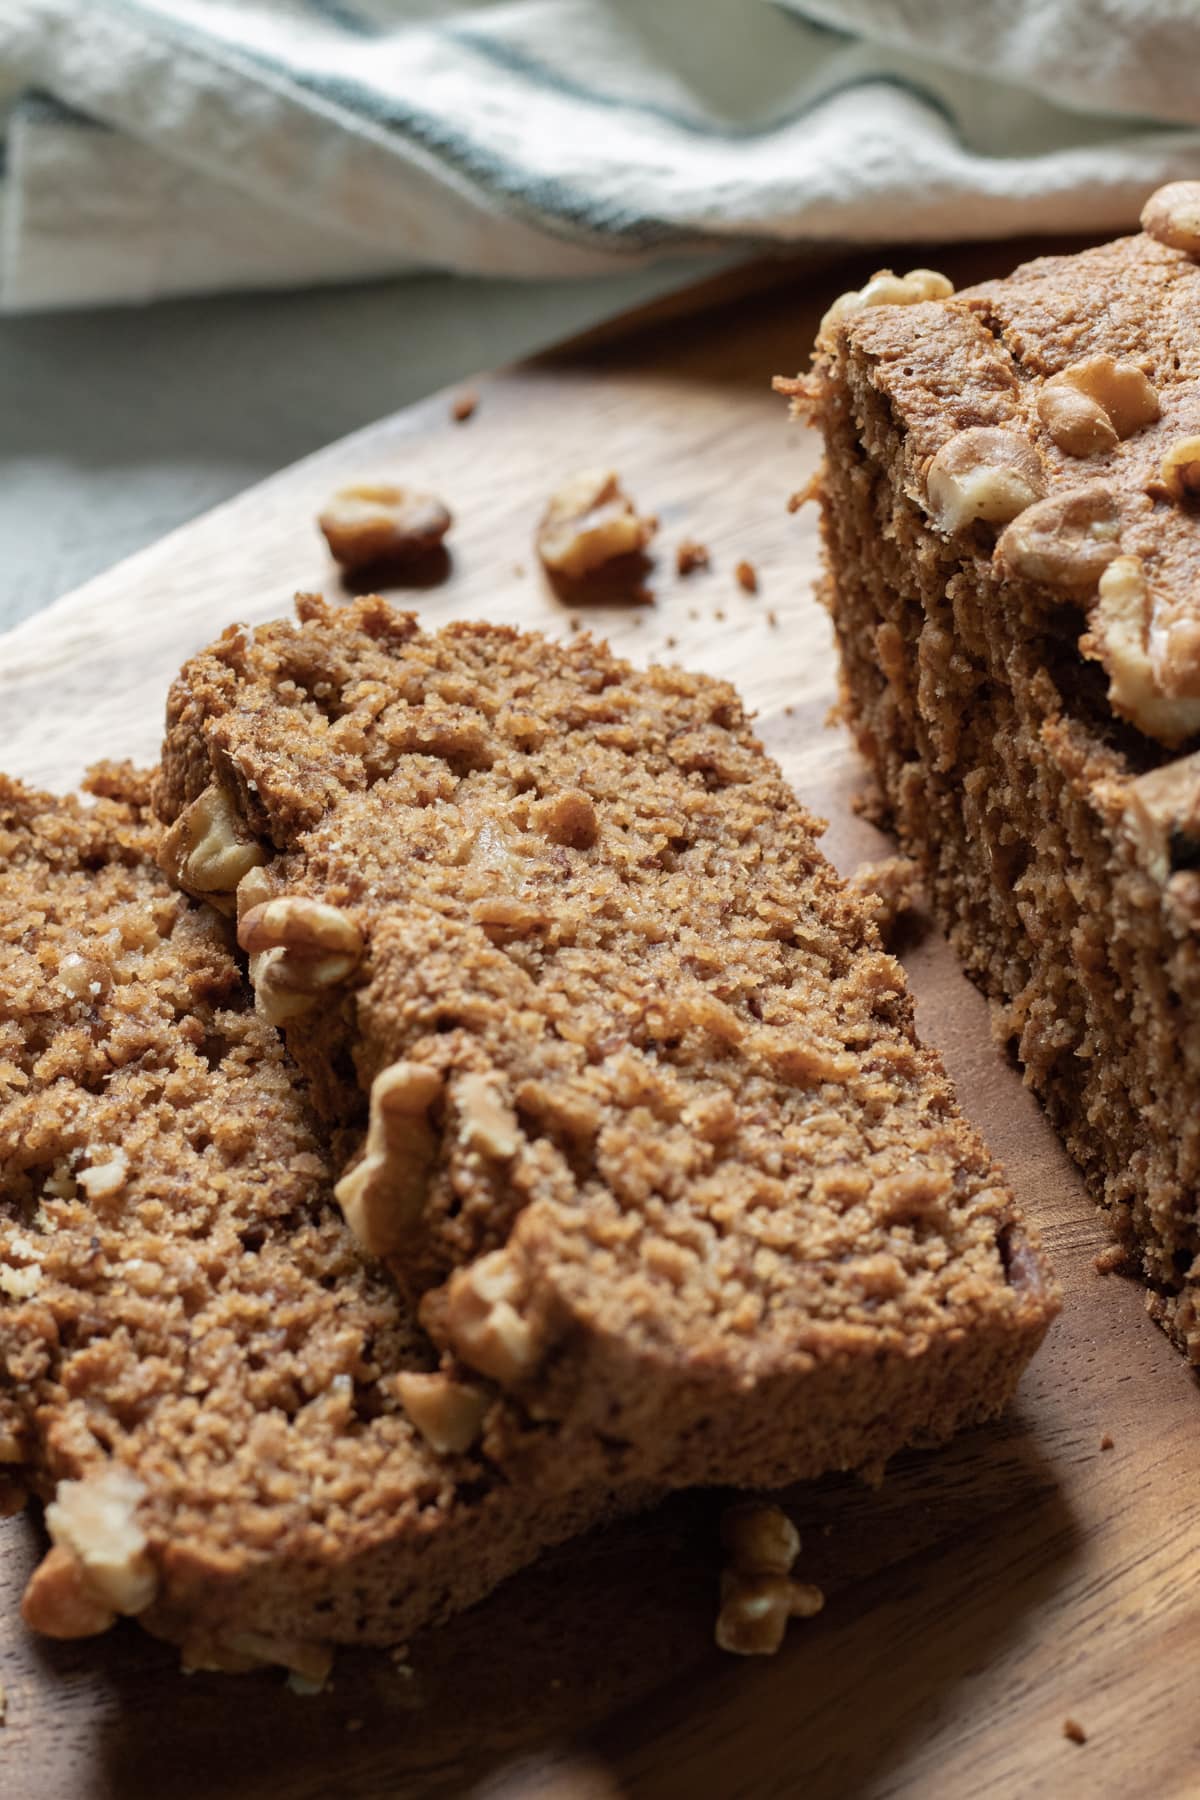 sliced oat flour banana bread showing the moist and hearty texture.